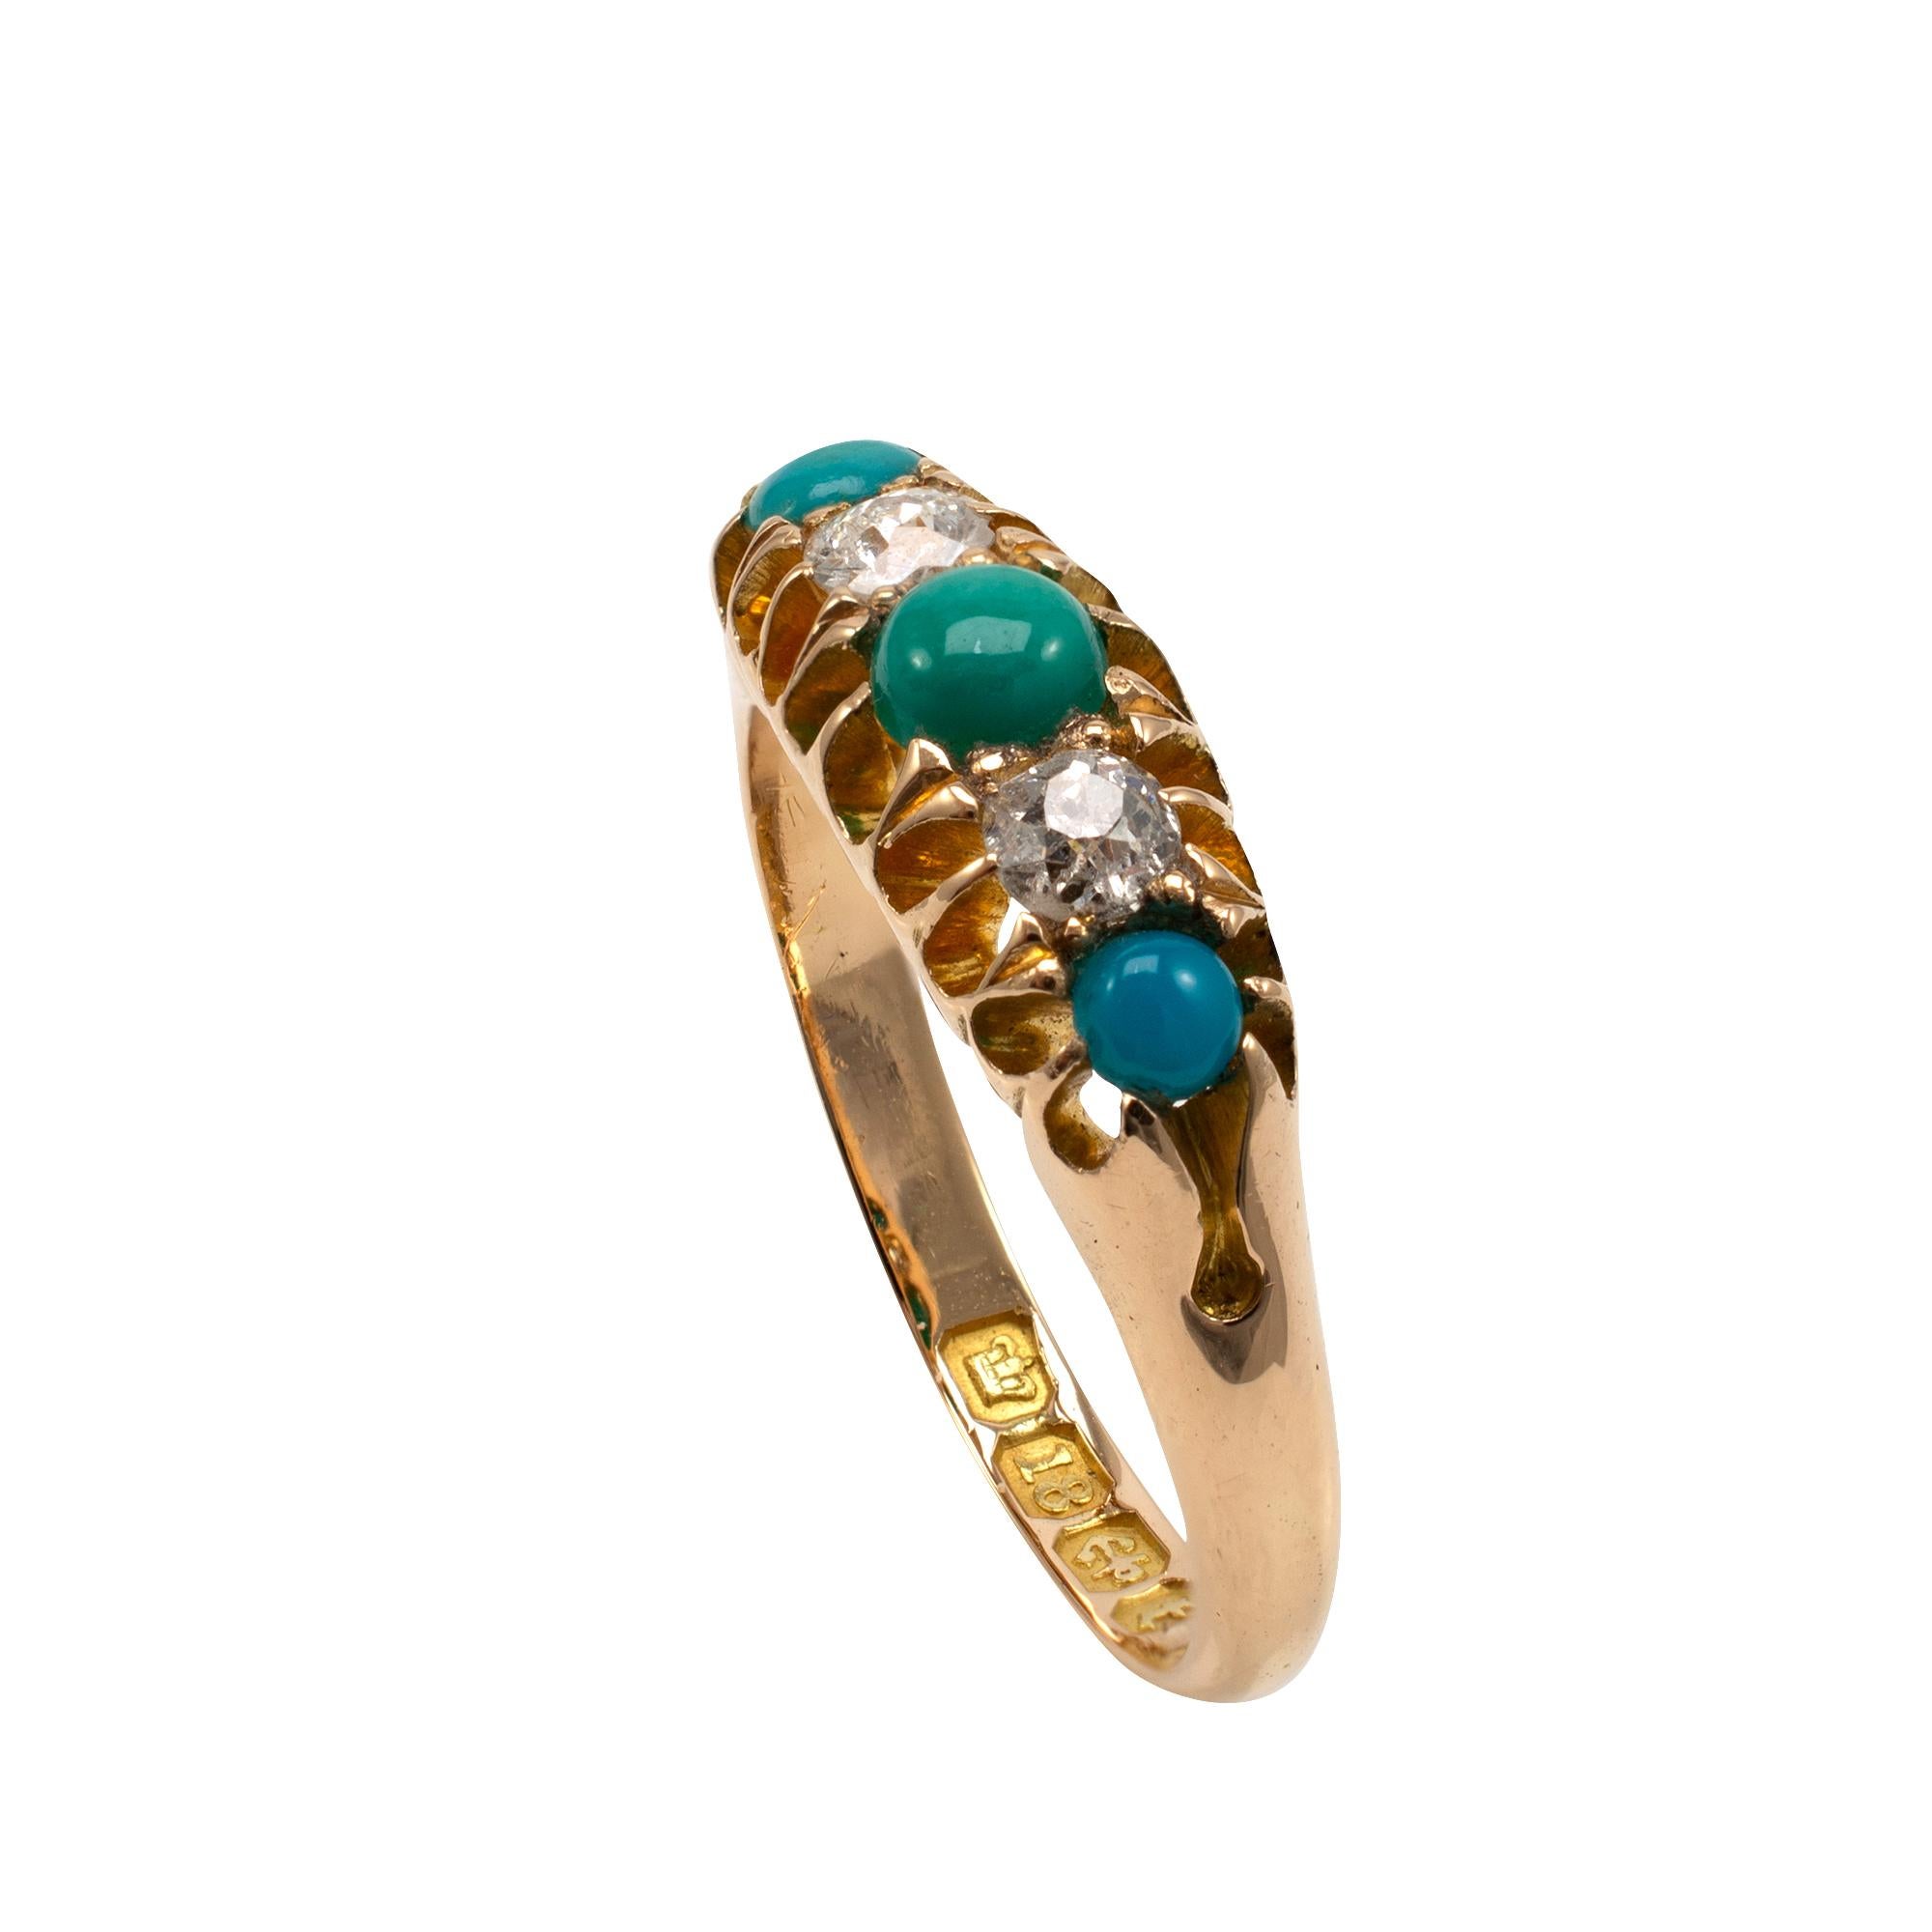 A classic turquoise and diamond ladies ring, crafted in 18k yellow gold, hallmarked Birmingham 1893.

Features graduating turquoise with beautifully clean old cut diamonds. A classic design with cut out detail shoulders to give a unique finish.

The